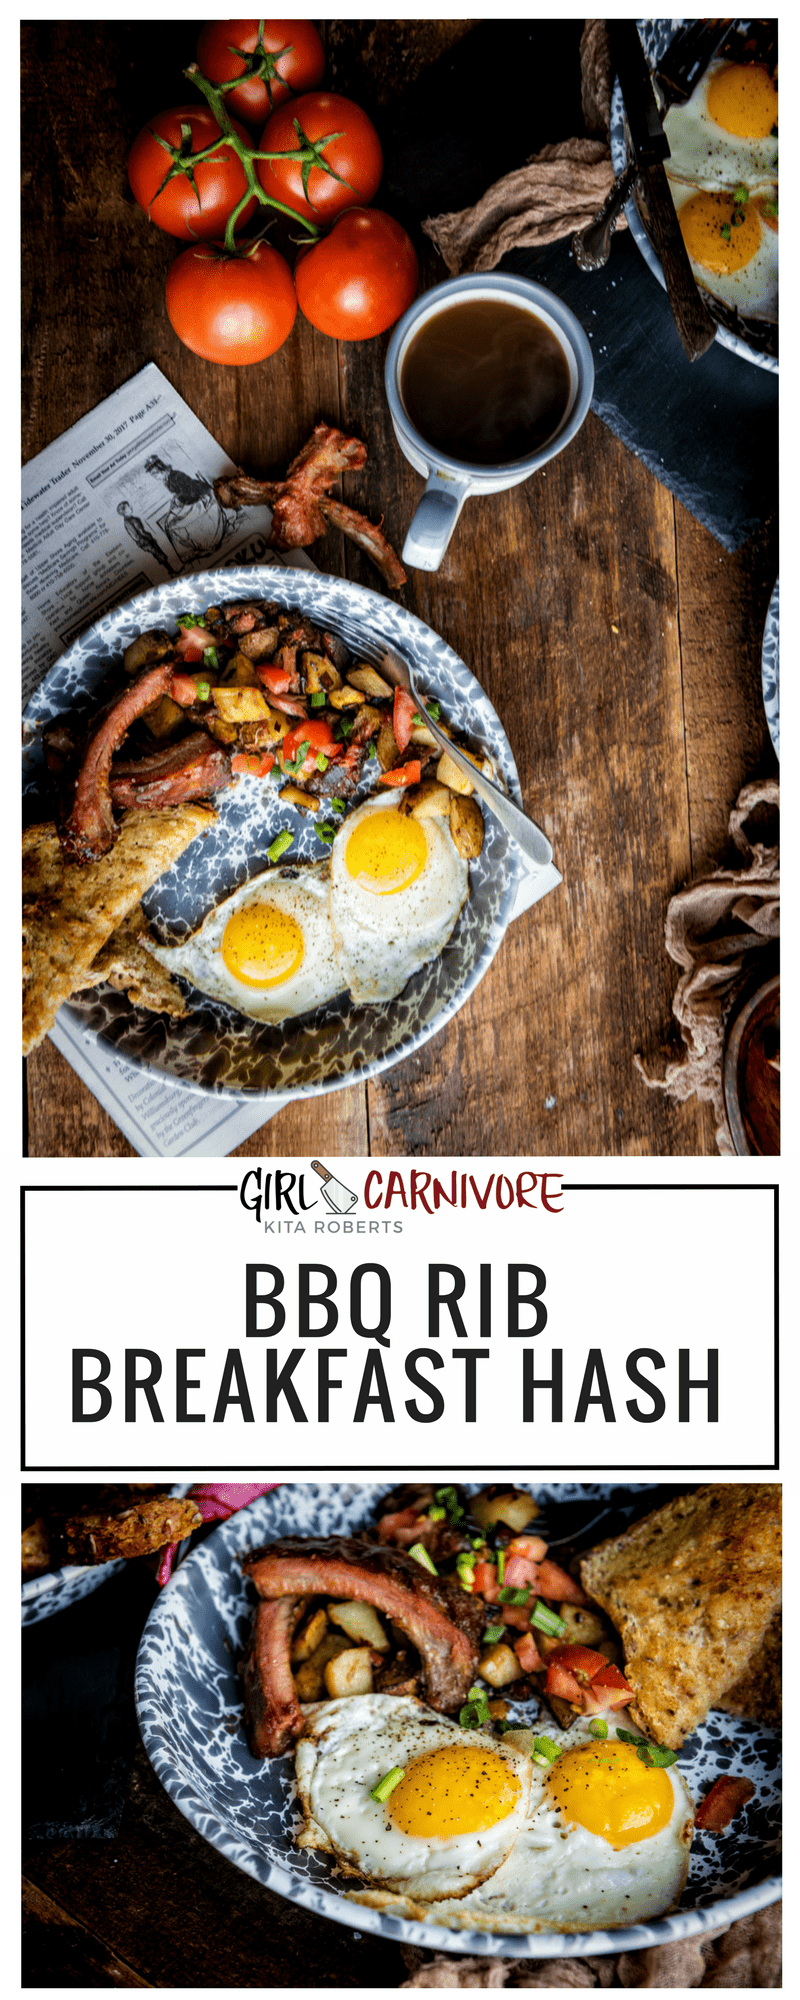 How to use up leftover ribs with this easy hash!